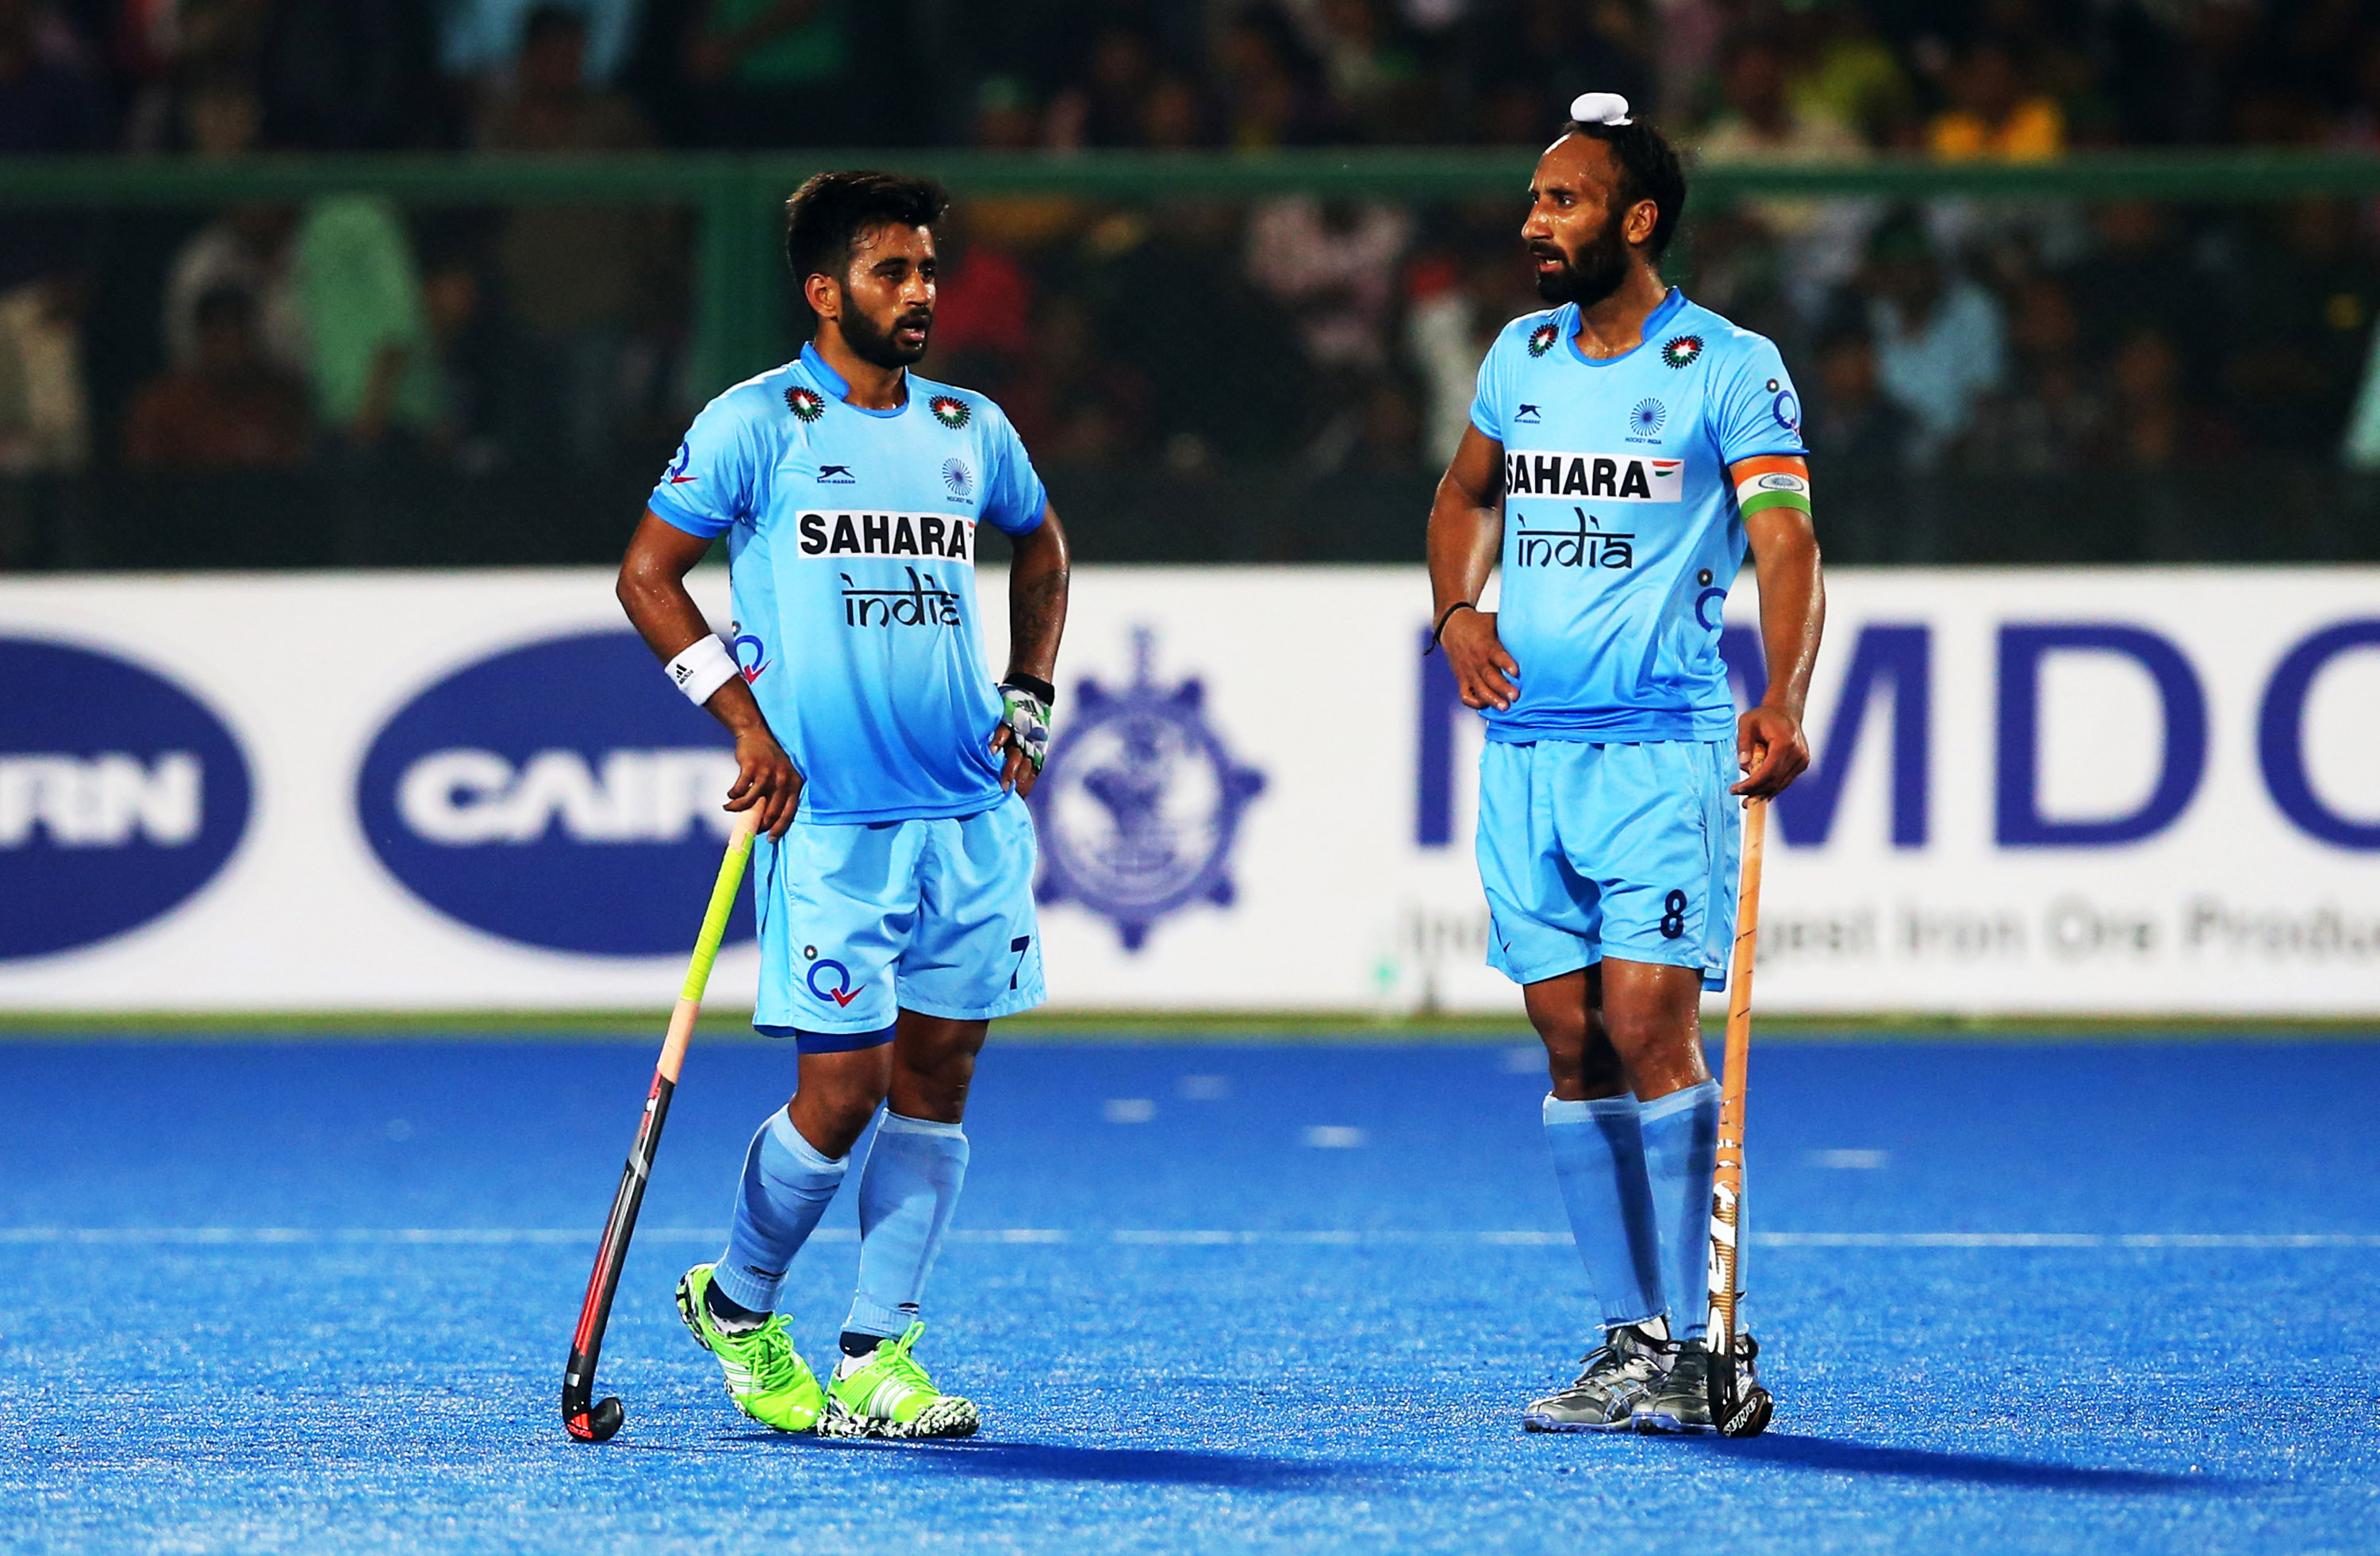 Manpreet Singh : Good mix of experience and youth can bring laurels in 2018